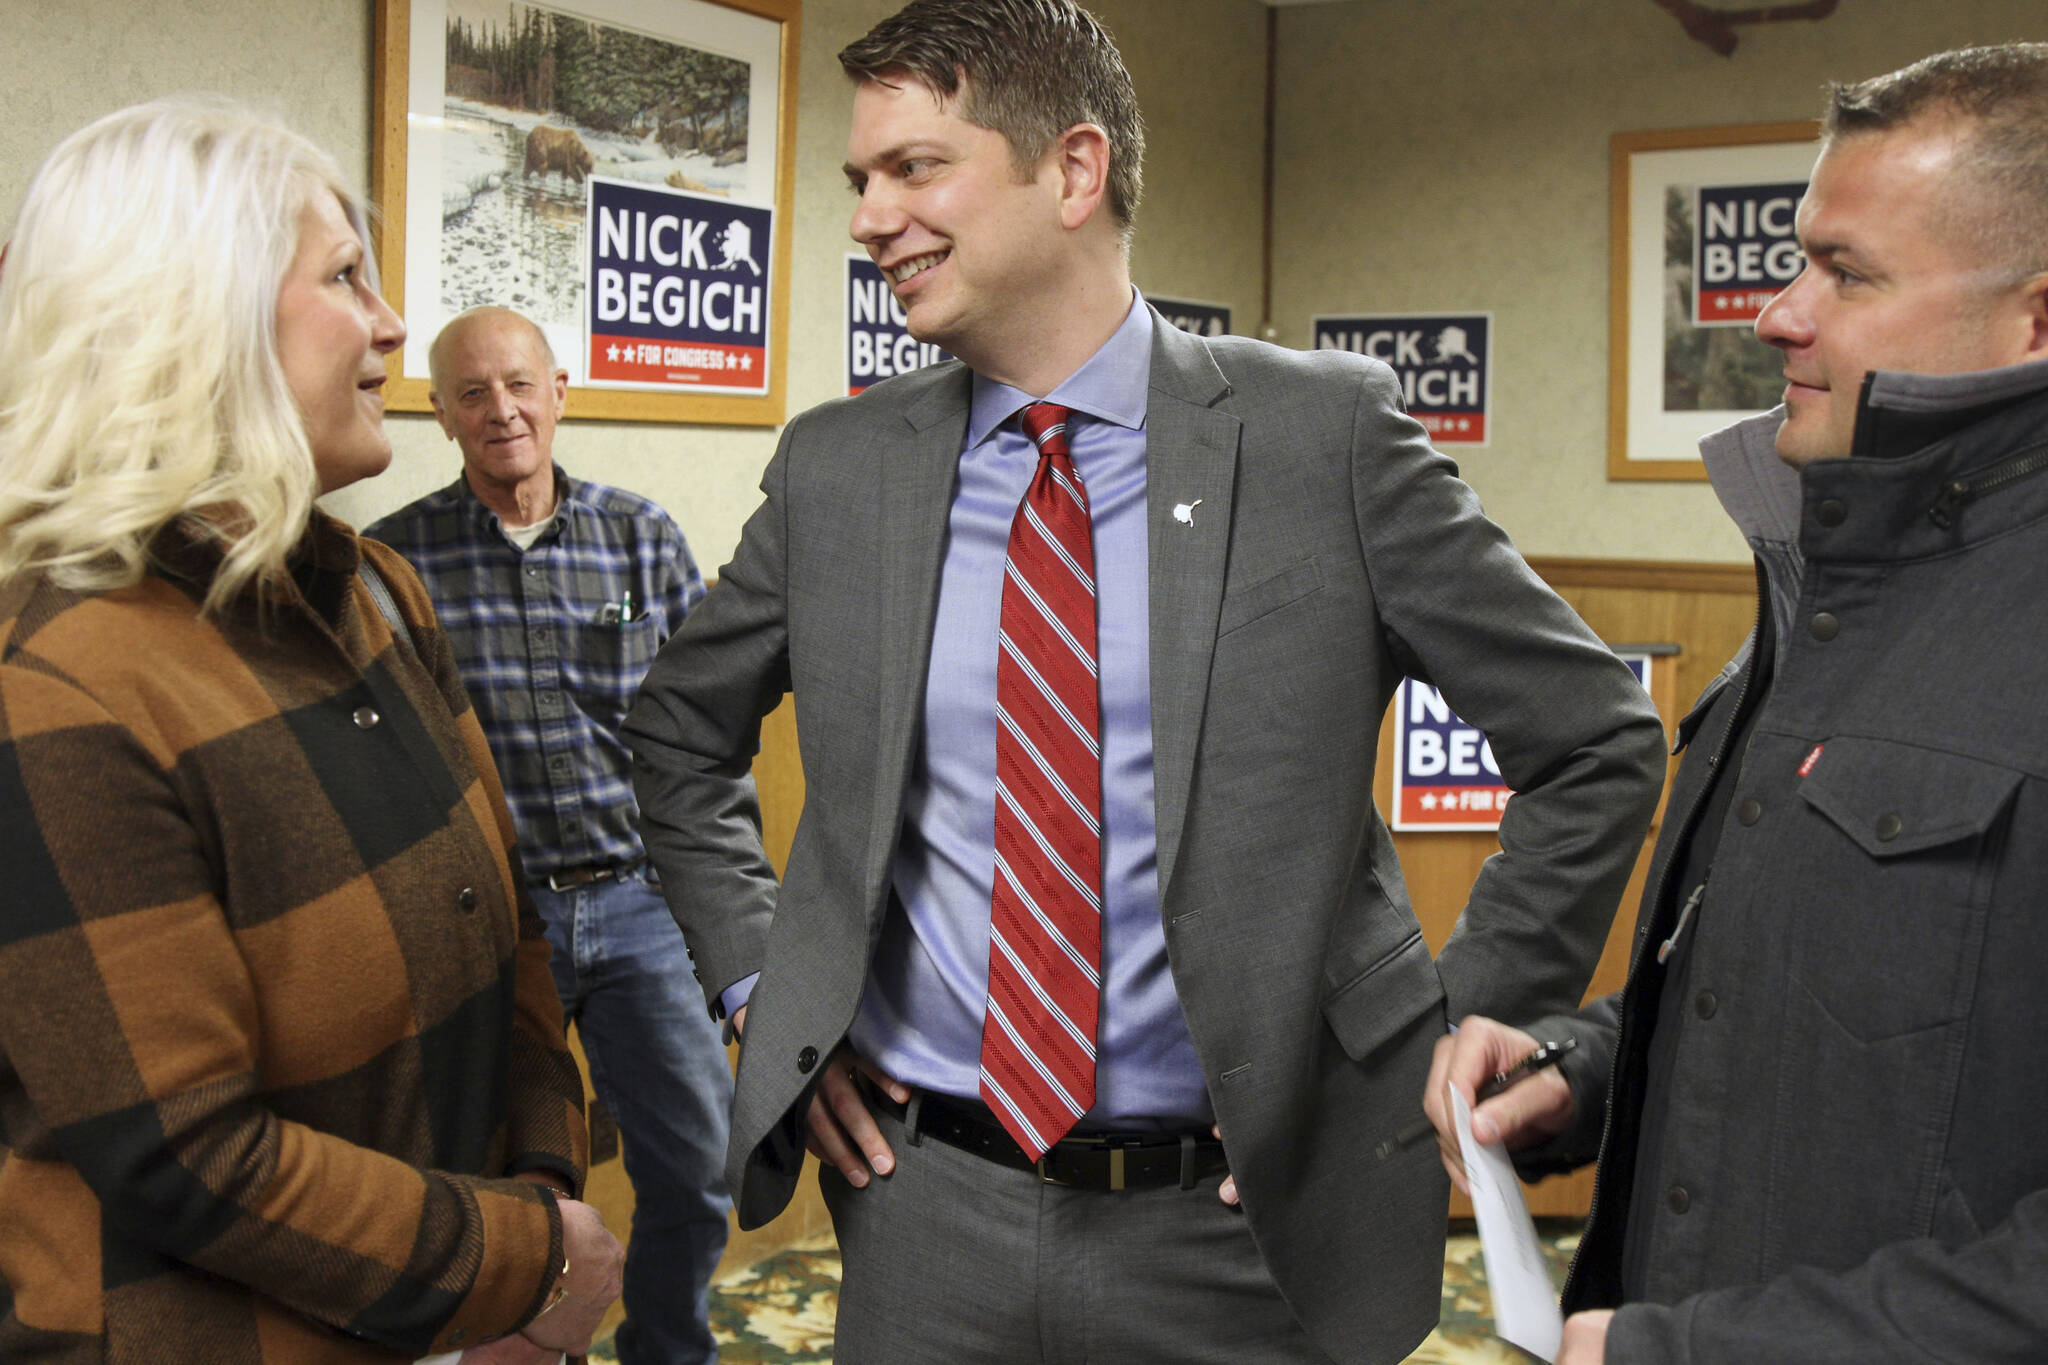 Nicholas Begich III, middle, speaks with supporters ahead of announcing his plans to run for Alaska's lone U.S. House seat on Thursday, Oct. 28, 2021, in Wasilla, Alaska. Begich, a Republican, plans to run for the seat that has been held since 1973 by Republican Rep. Don Young. (AP Photo / Mark Thiessen)